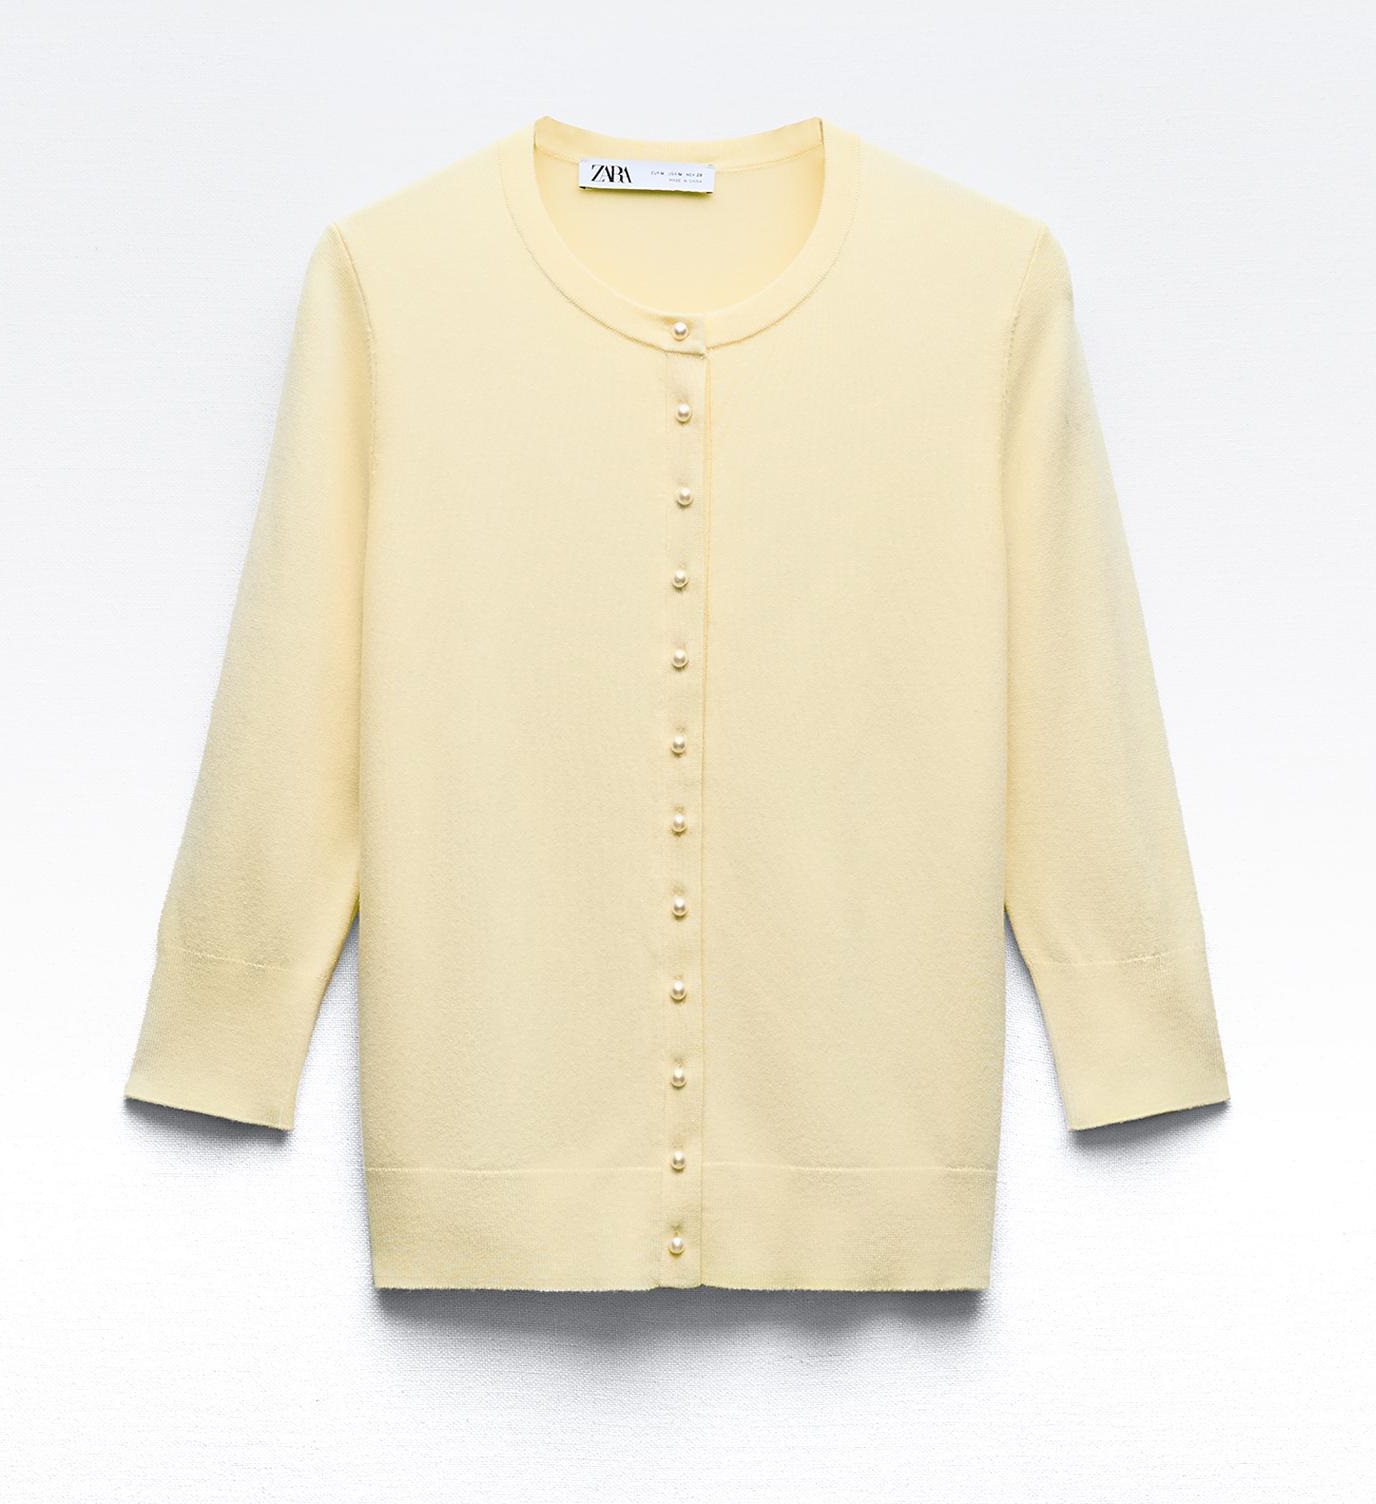 Кардиган Zara Plain Knit With Faux Pearl Buttons, светло-желтый поло zara plain fine knit светло желтый